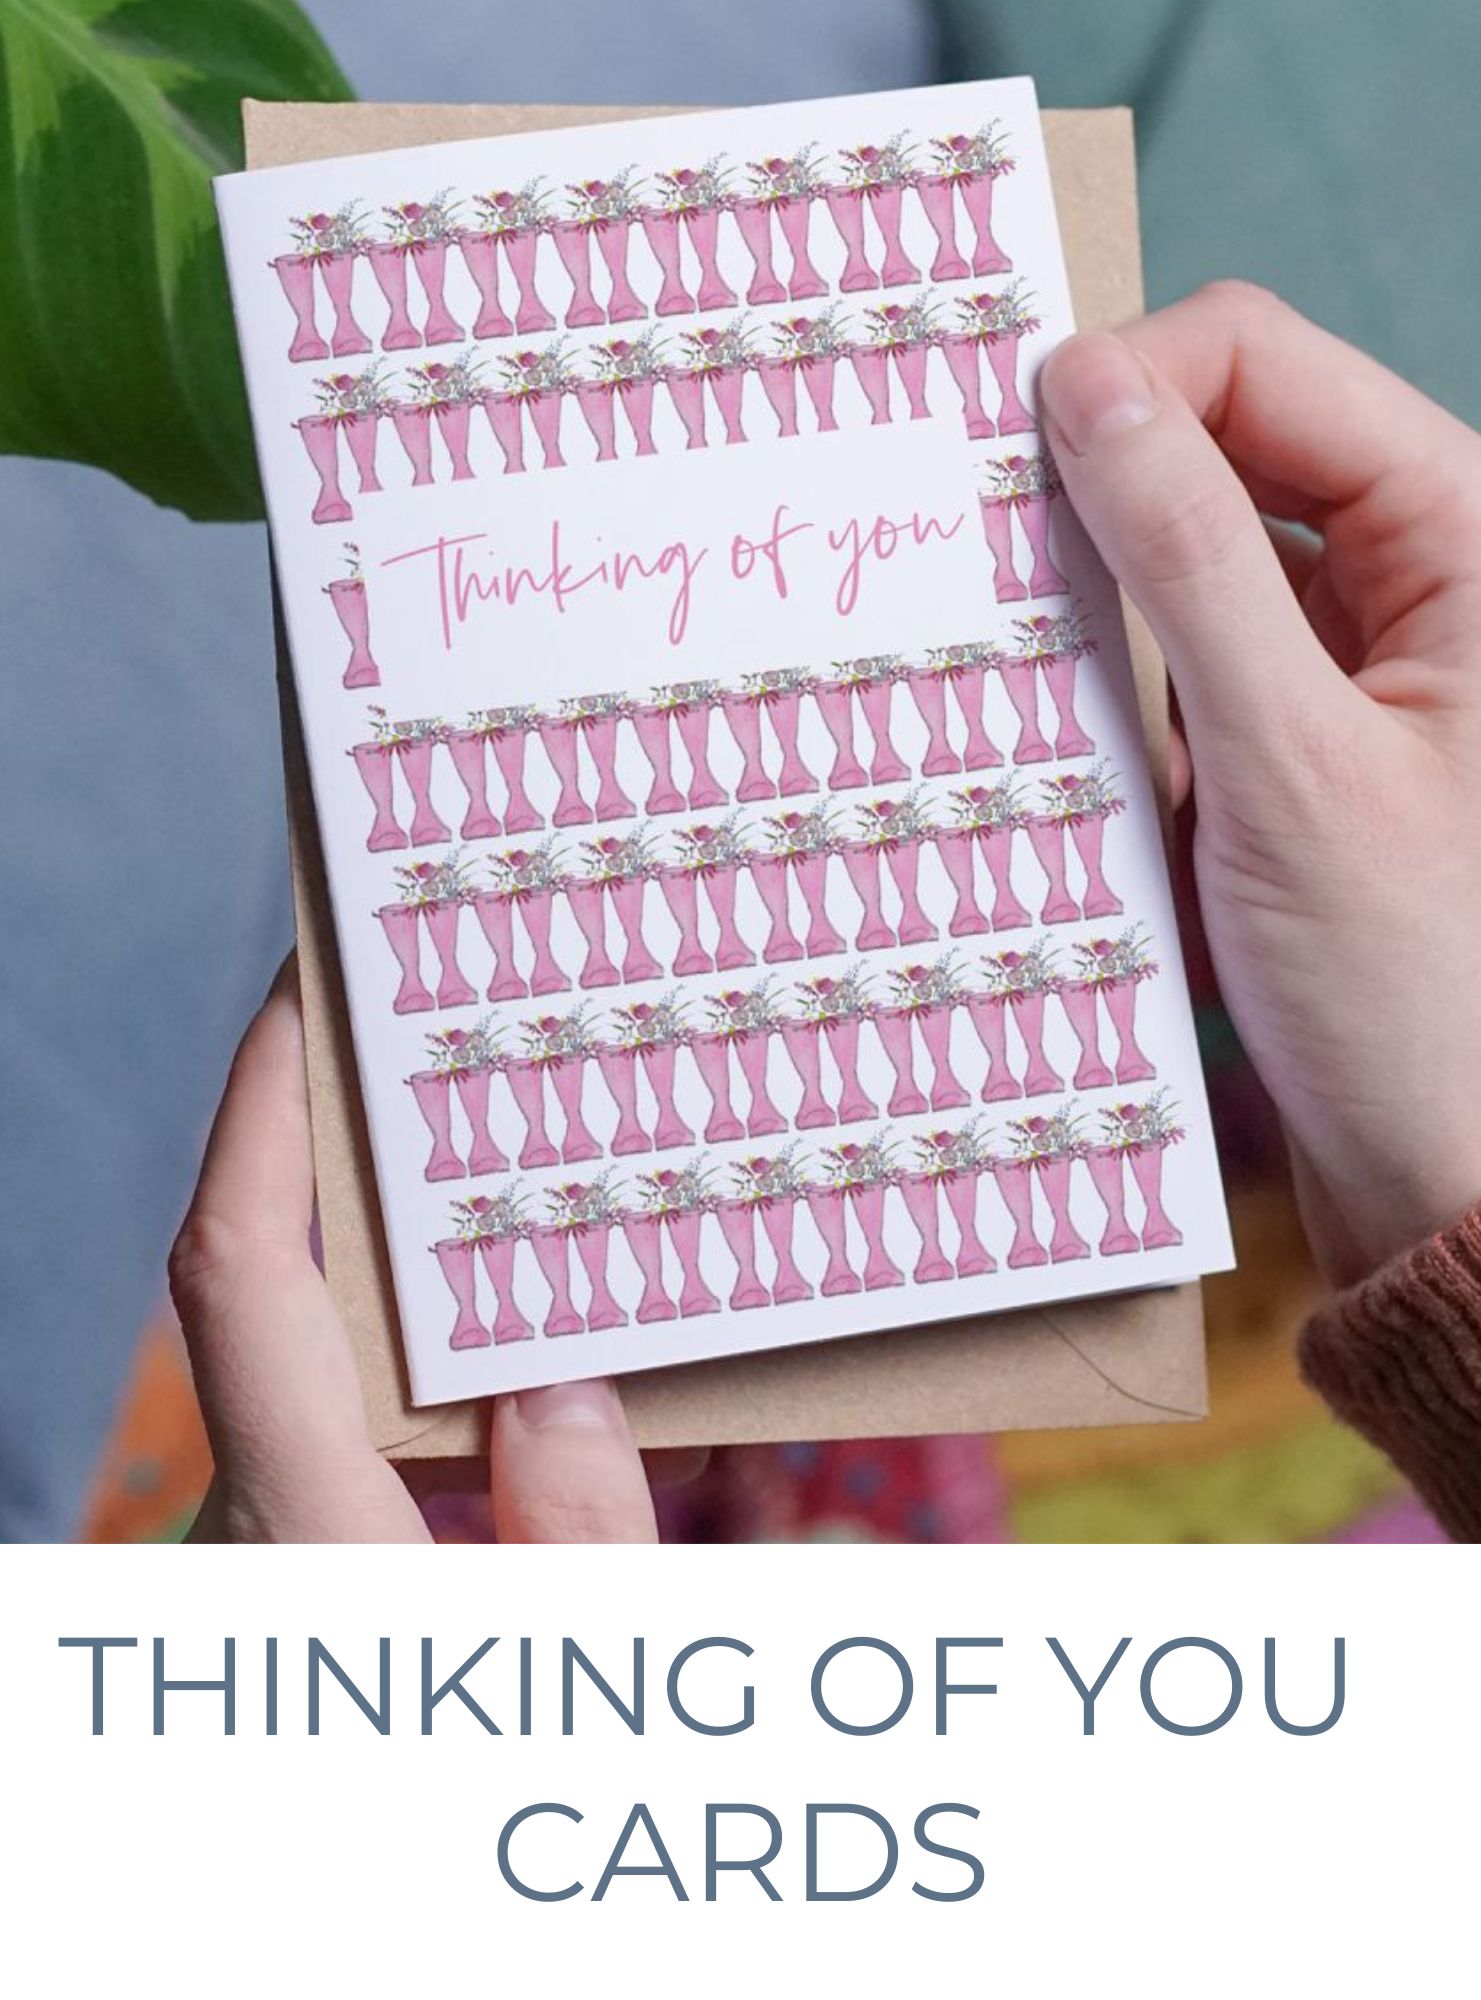 THINKING OF YOU CARDS